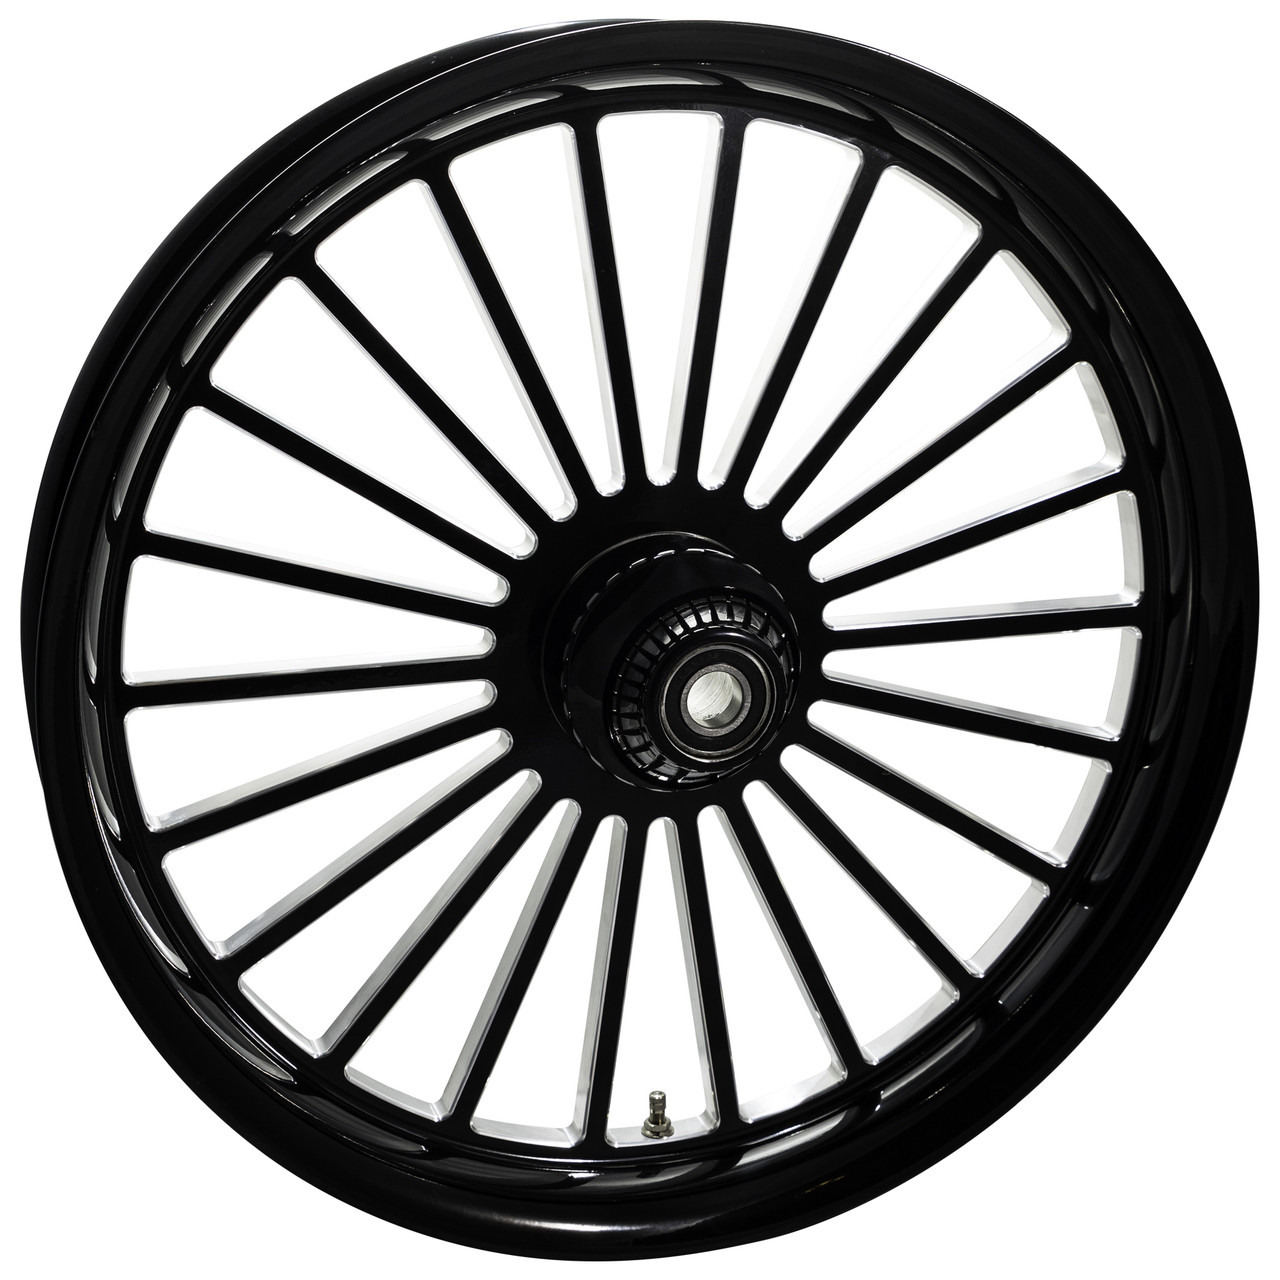 Black Contrast Harley Davidson 21 inch Fat Front Motorcycle Wheels Mystic